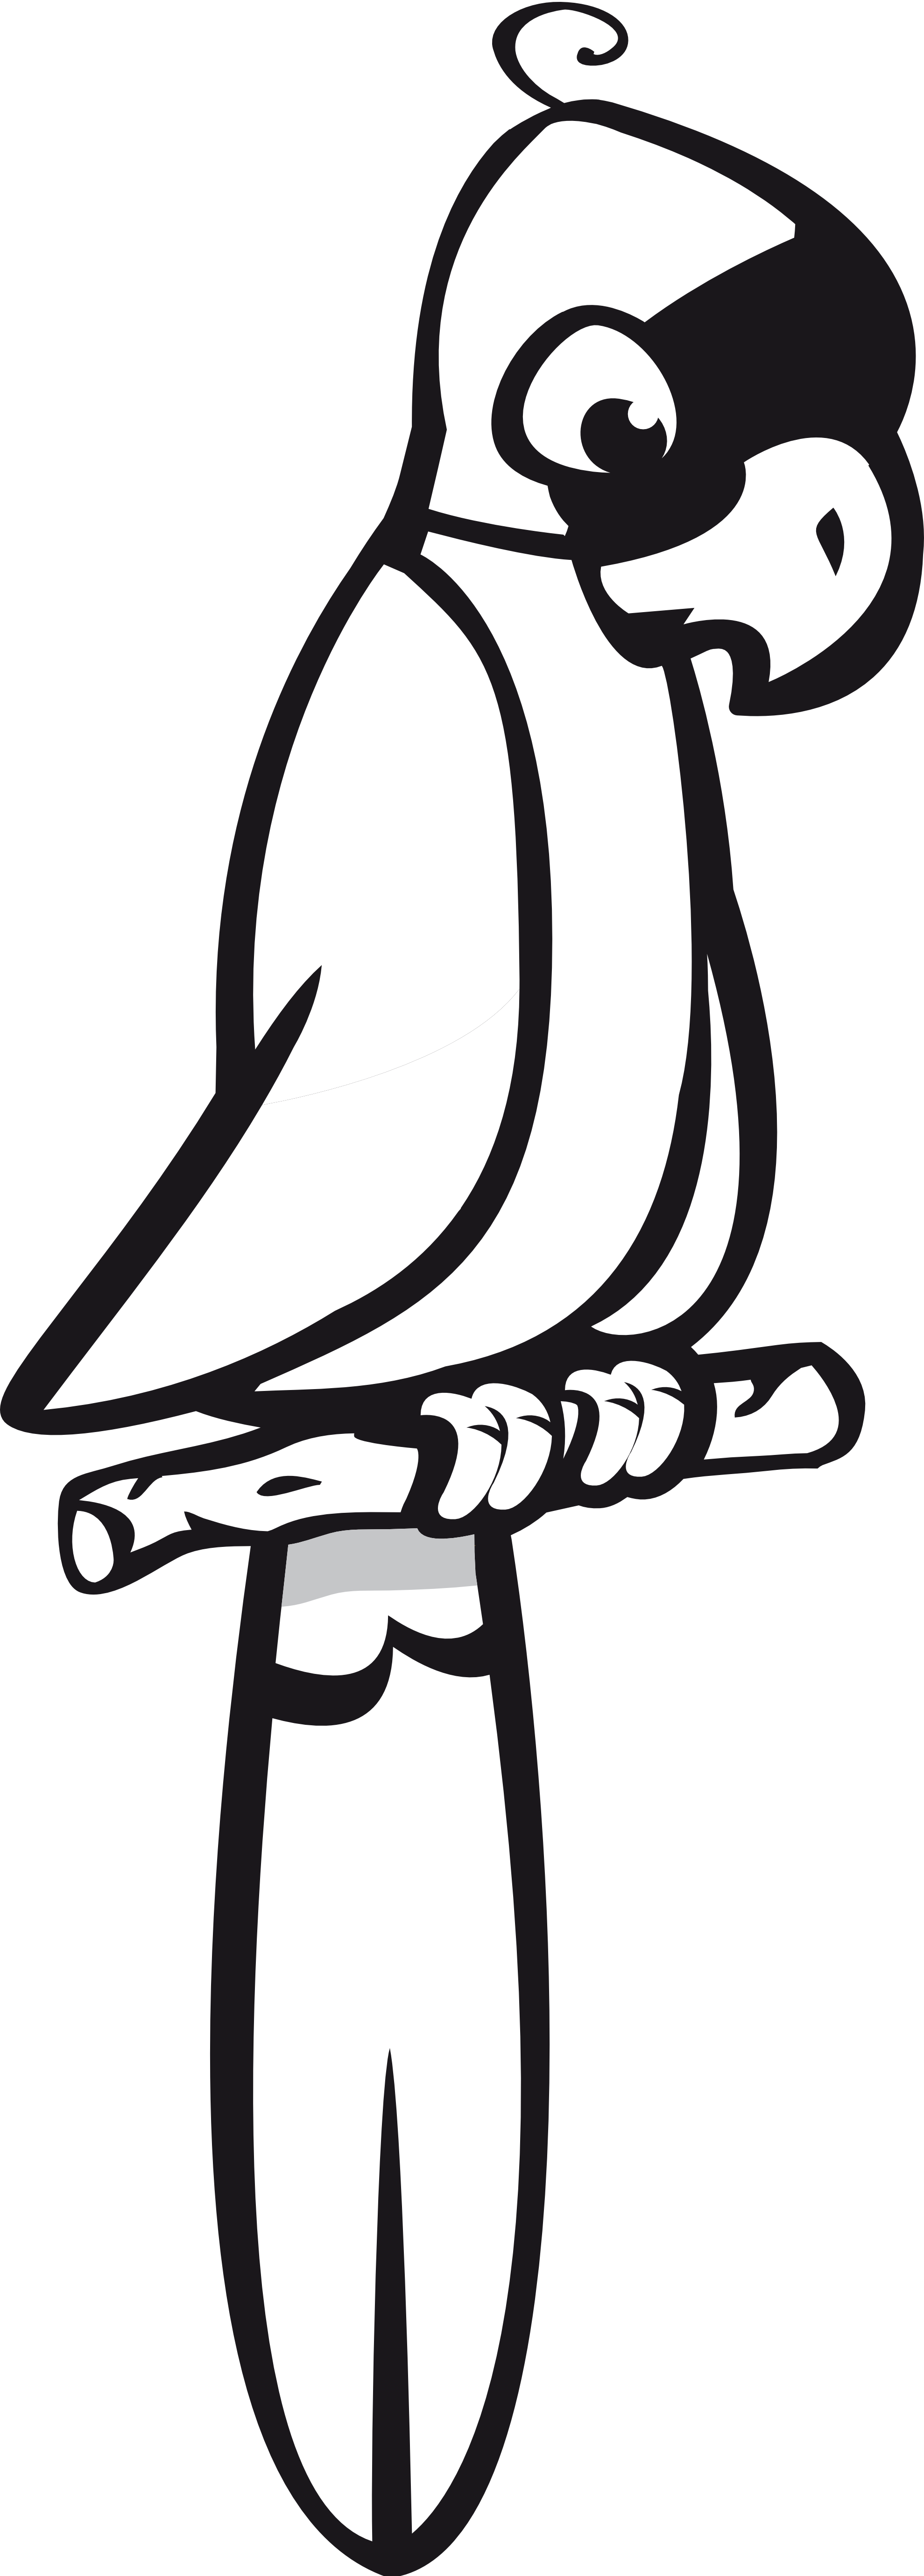 Parrot Clipart Black And White.